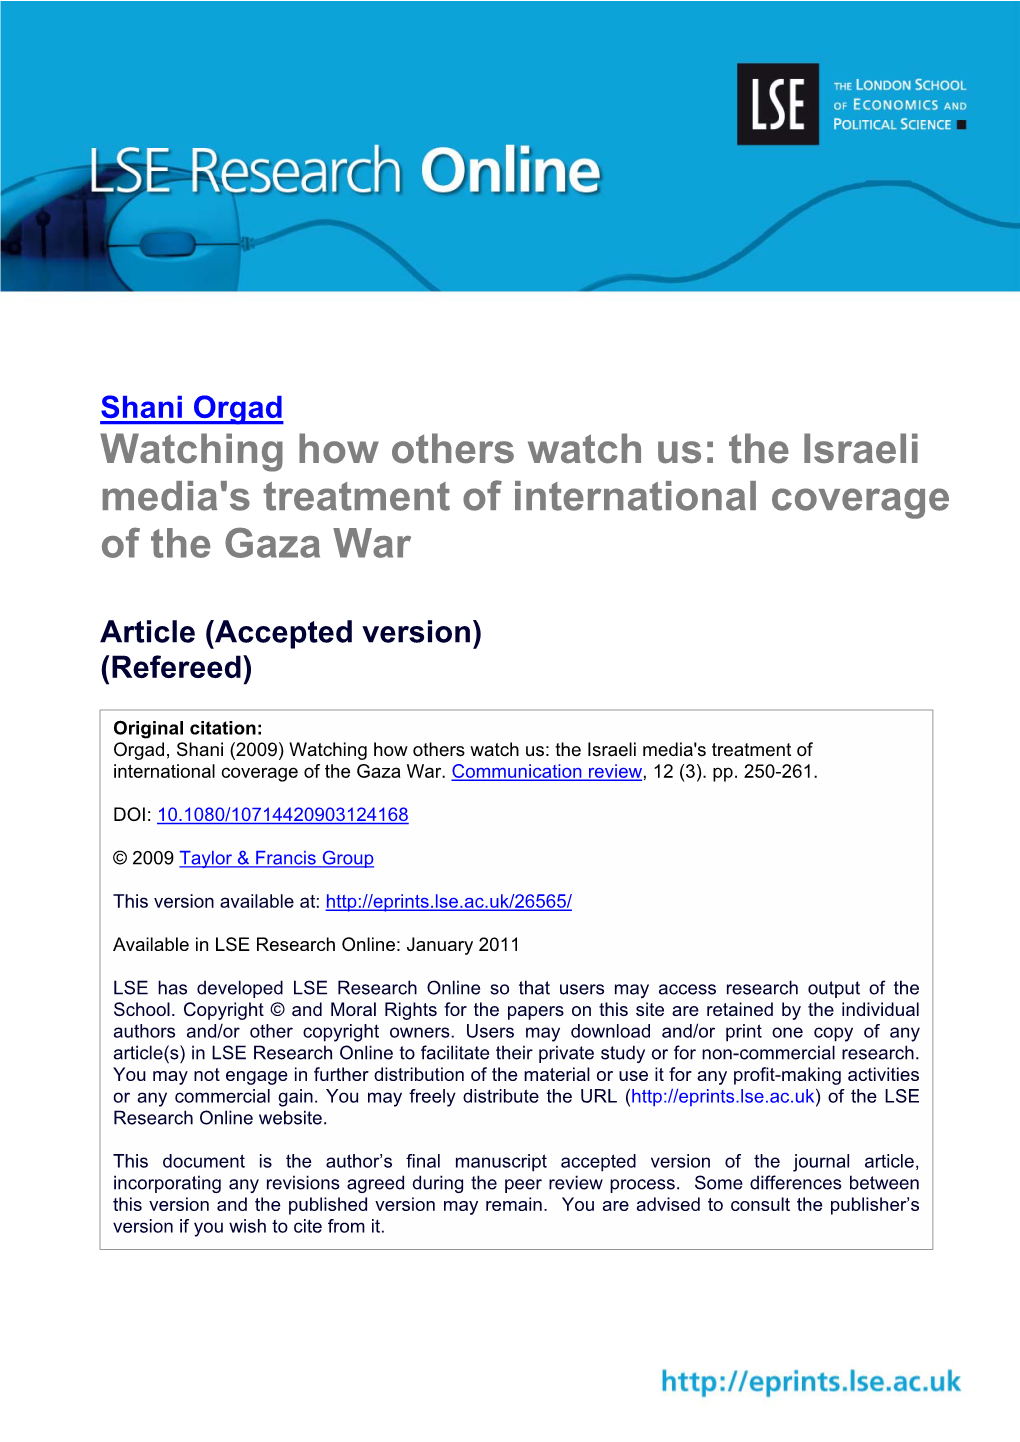 Watching How Others Watch Us: the Israeli Media's Treatment of International Coverage of the Gaza War